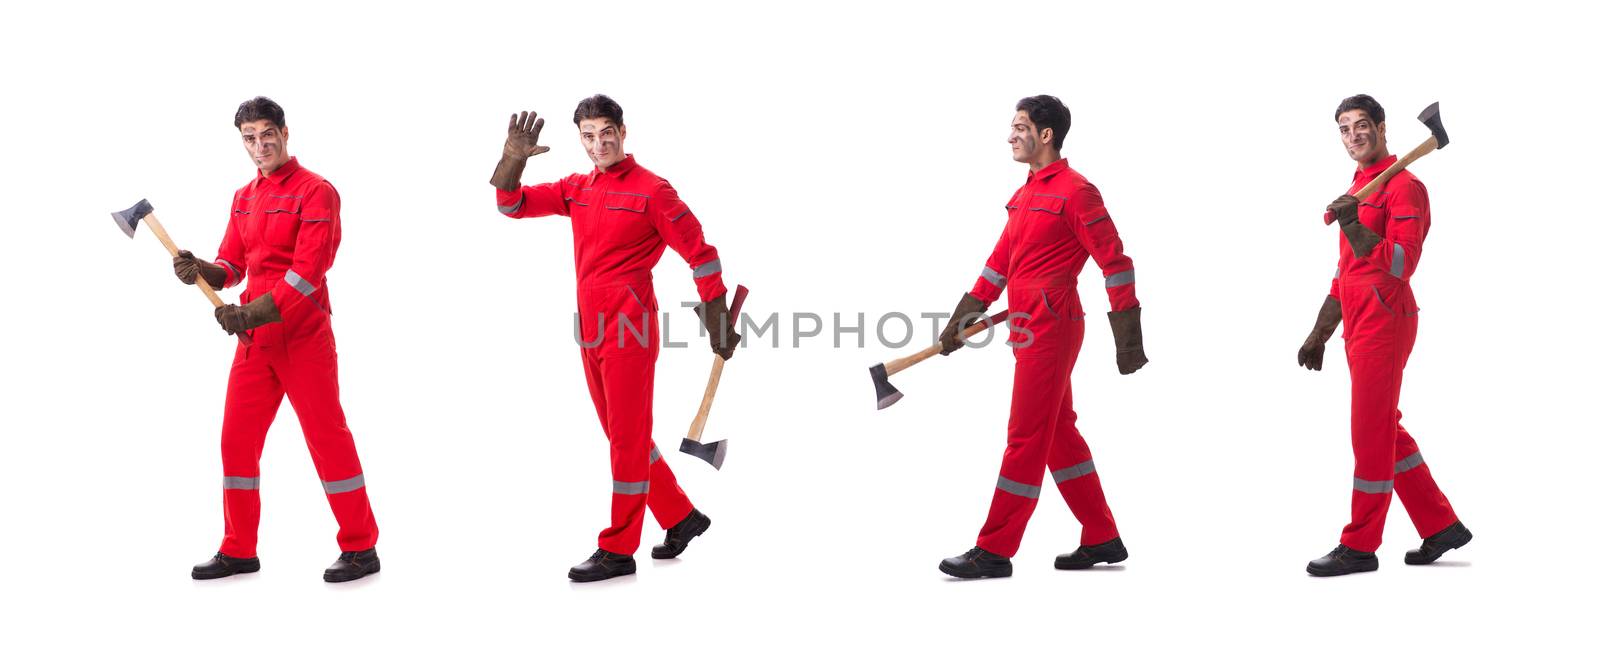 Contractor employee with axe on white background 